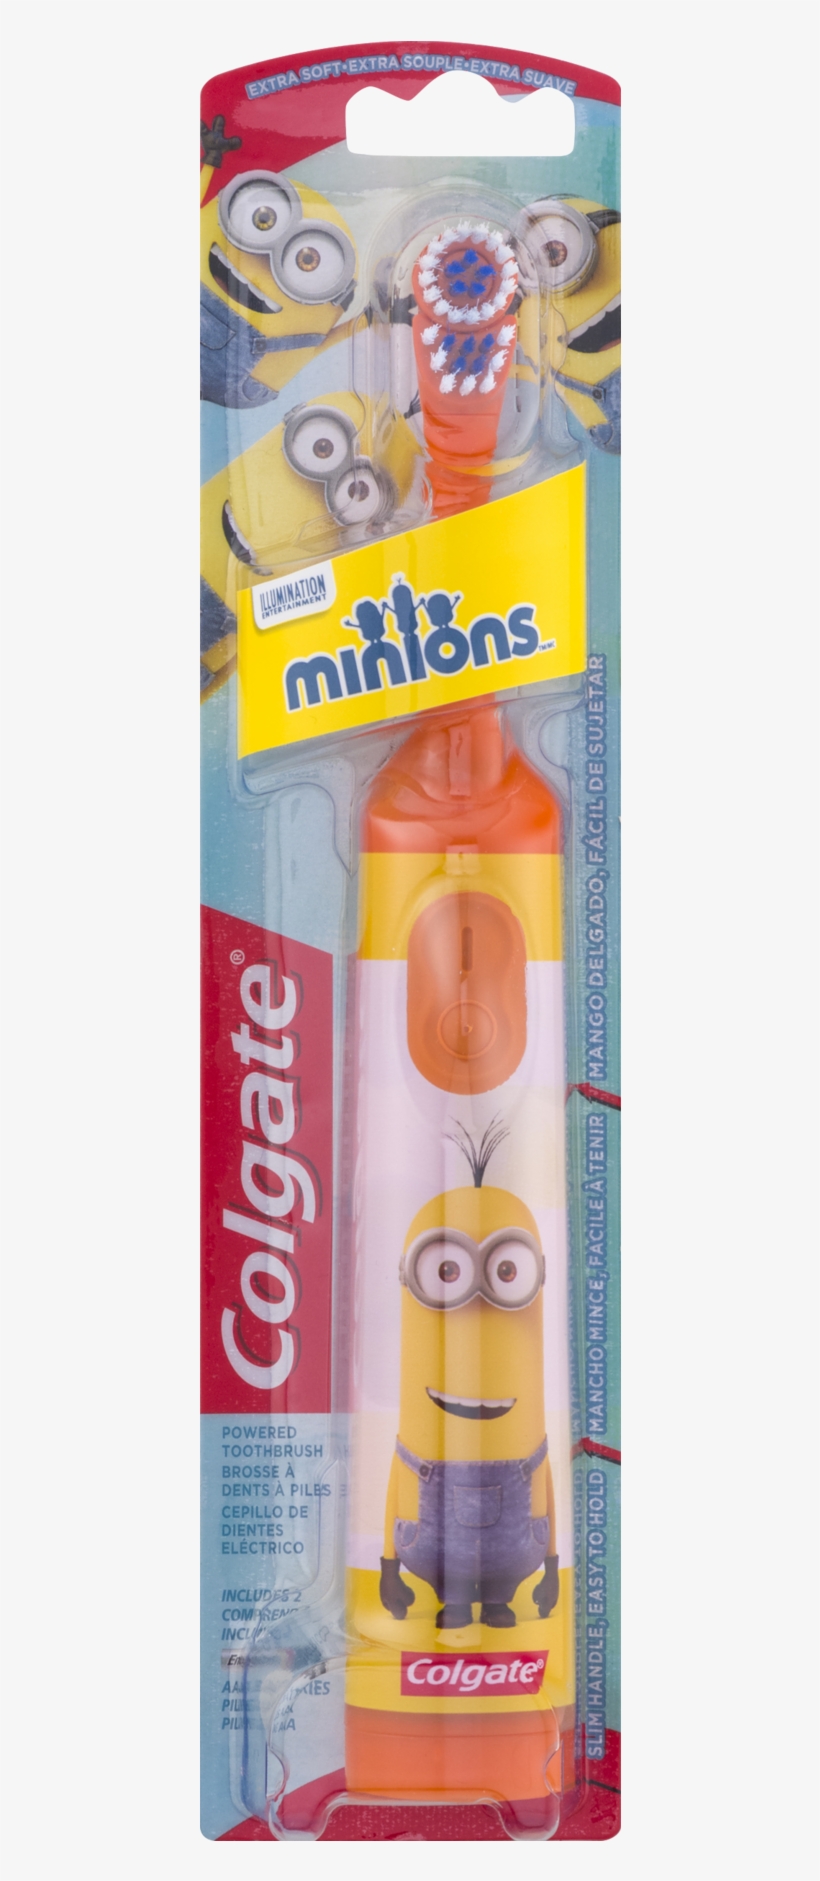 Colgate Minions Extra Soft Powered Toothbrush, transparent png #3230814